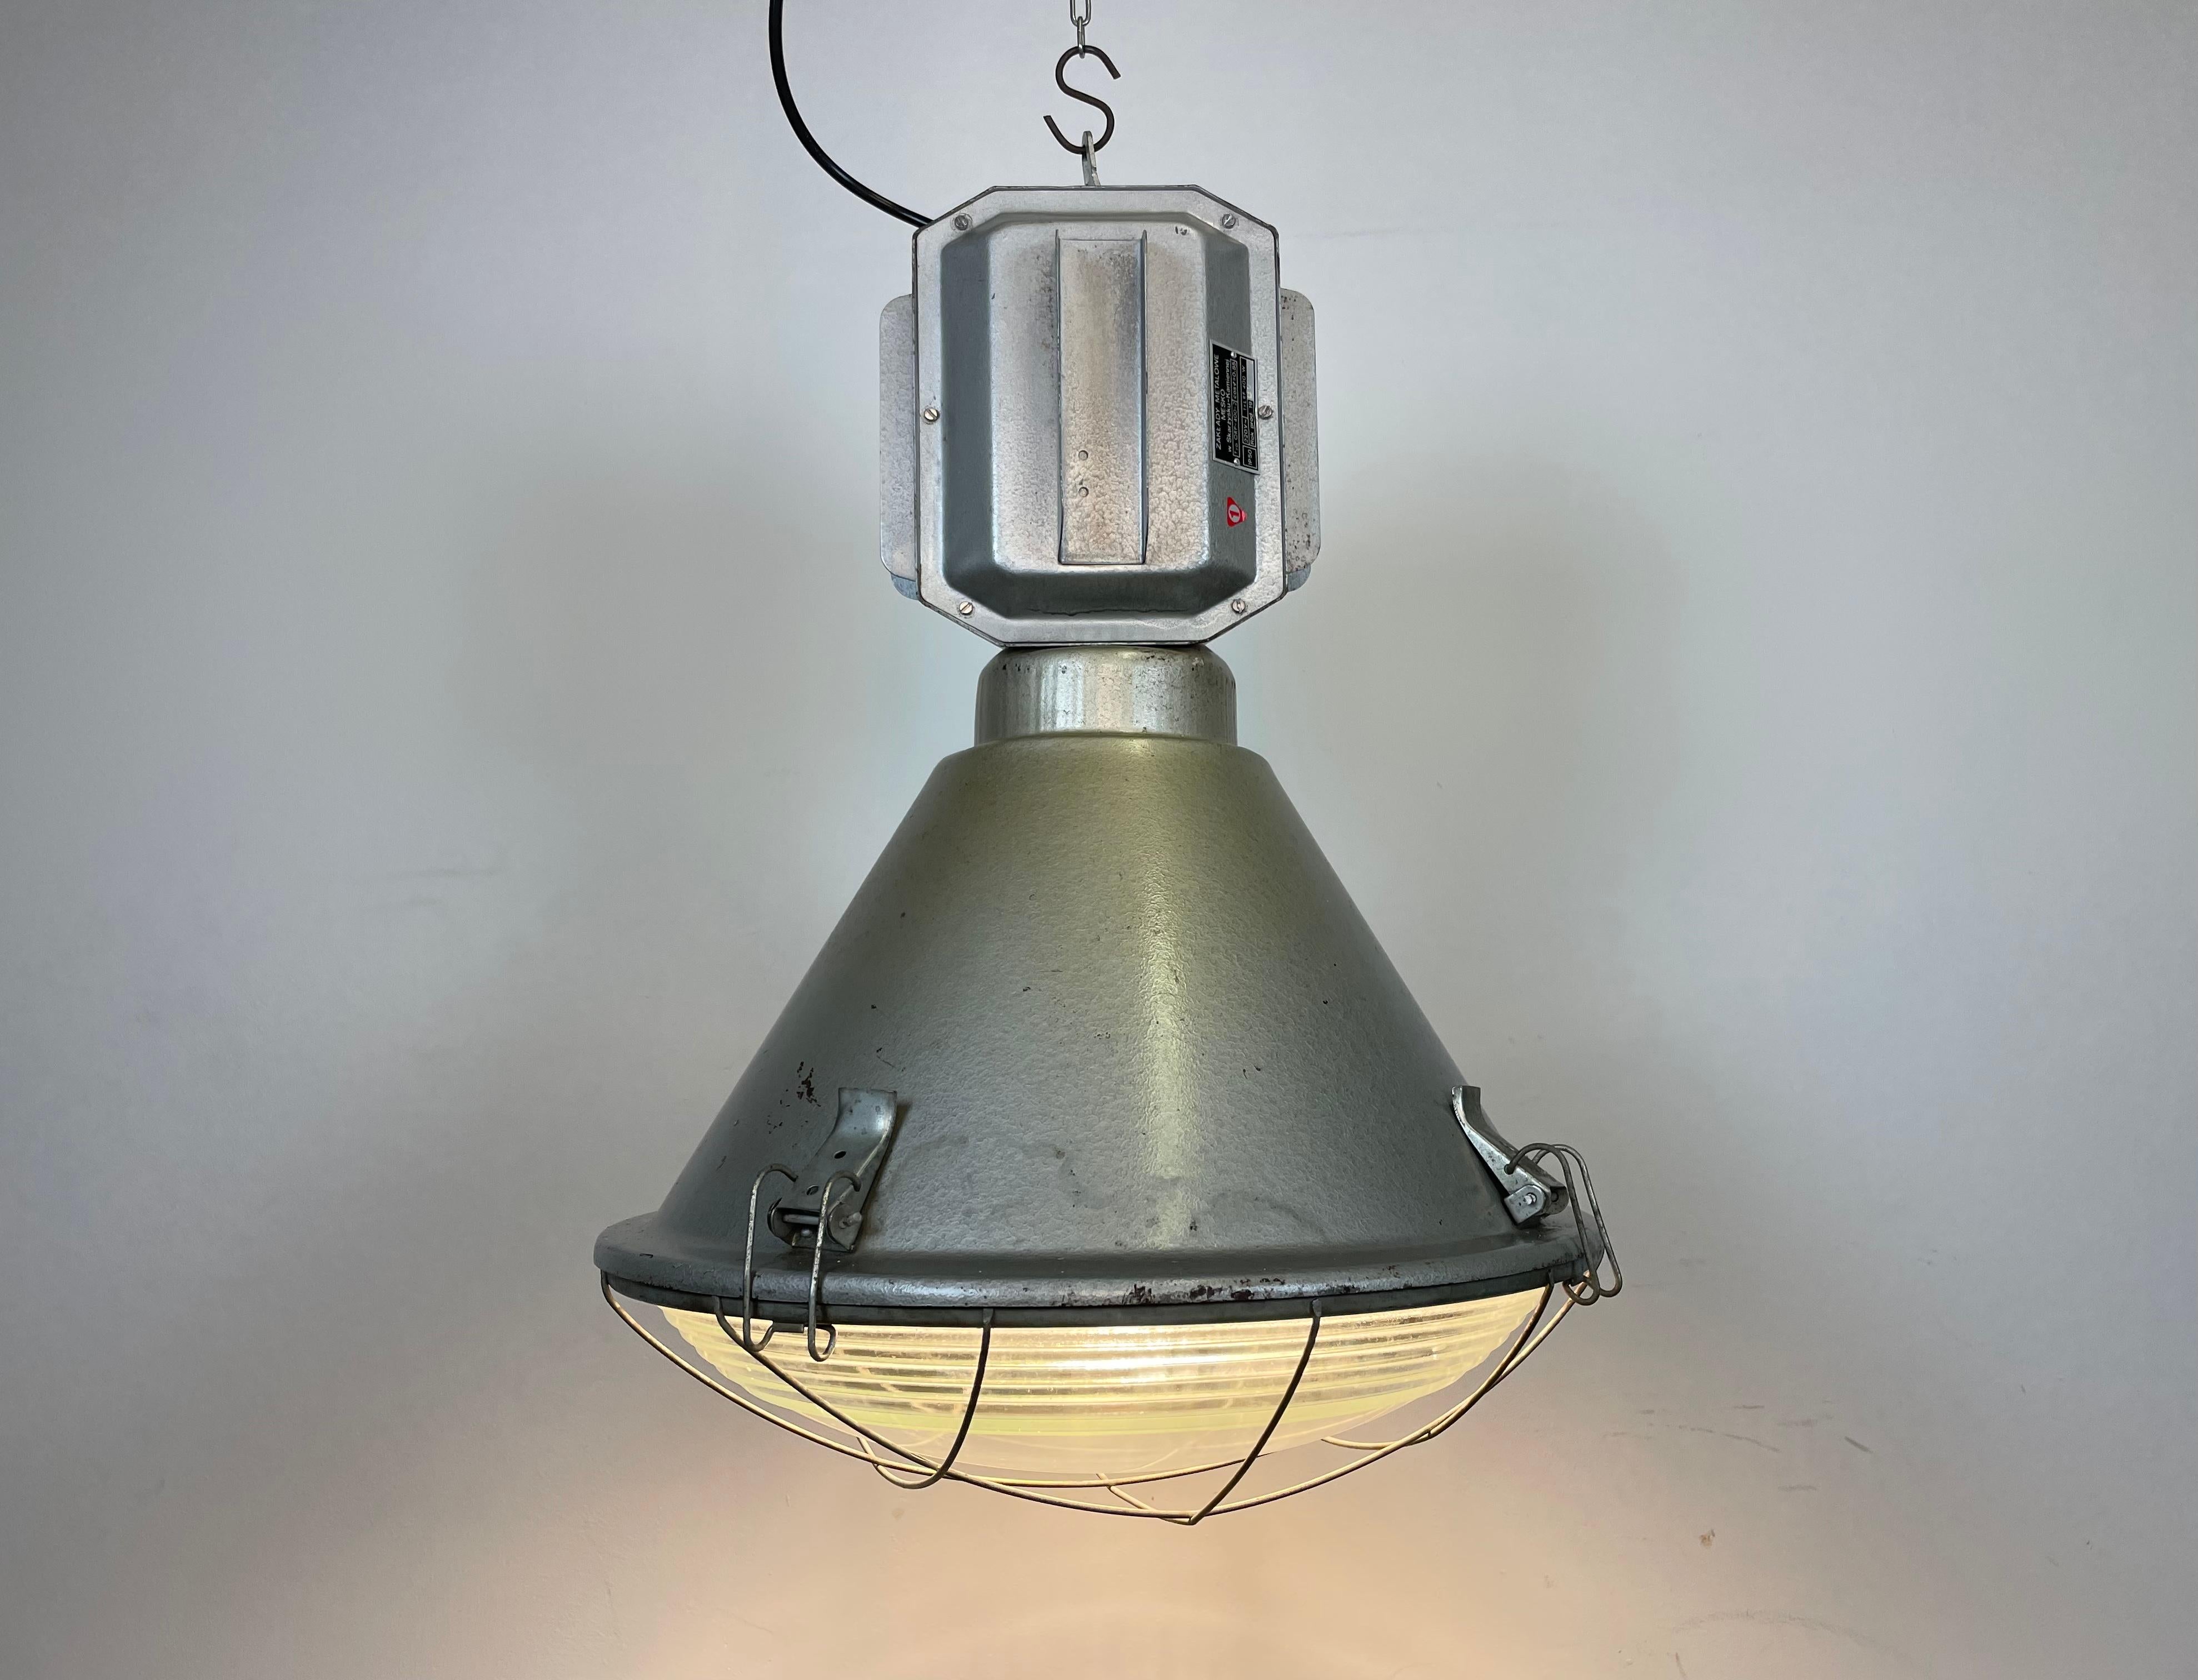 Industrial Polish Factory Ceiling Lamp with Glass Cover from Mesko, 1990s For Sale 9